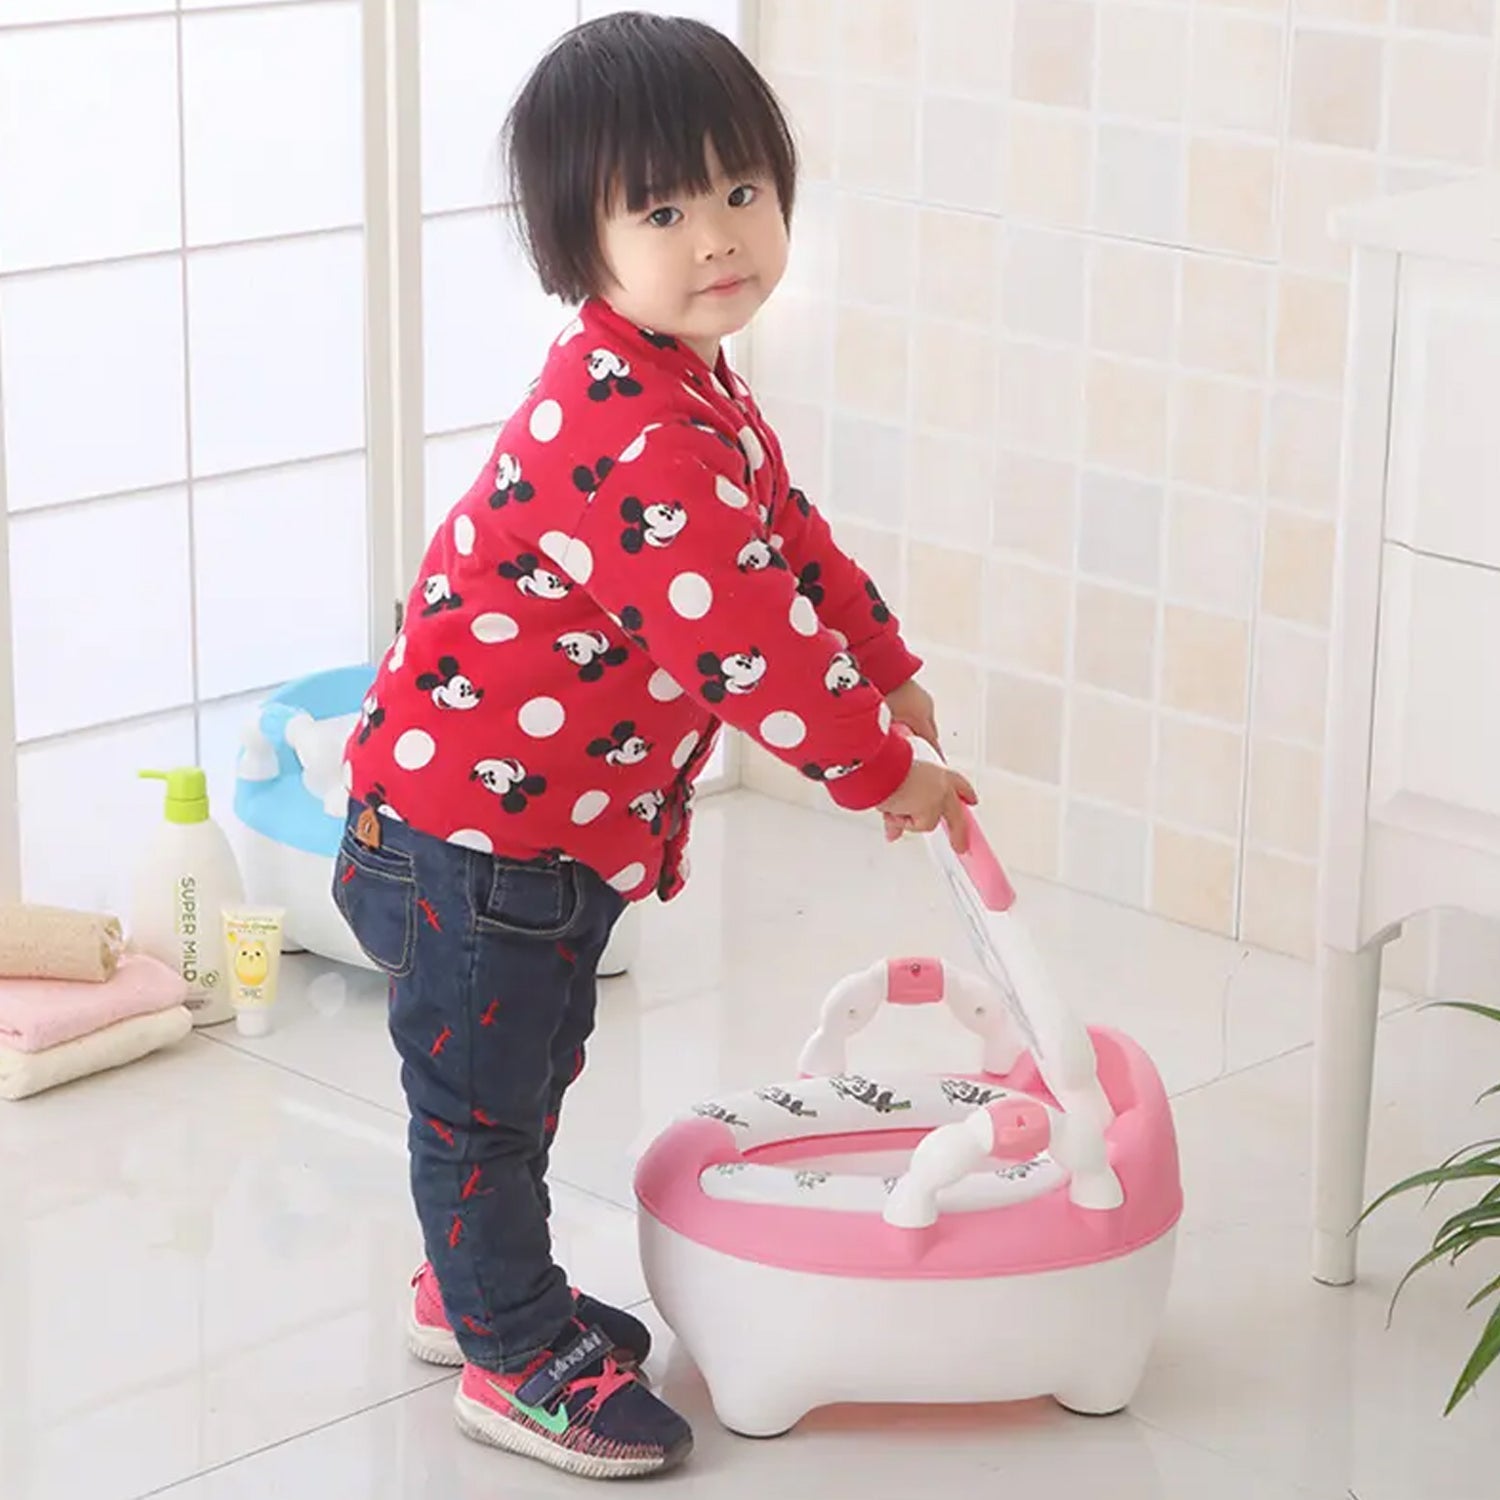 4579 Baby portable Toilet, Baby Potty Training Seat Baby Potty Chair for Toddler Boys Girls Potty Seat for 1+ year child